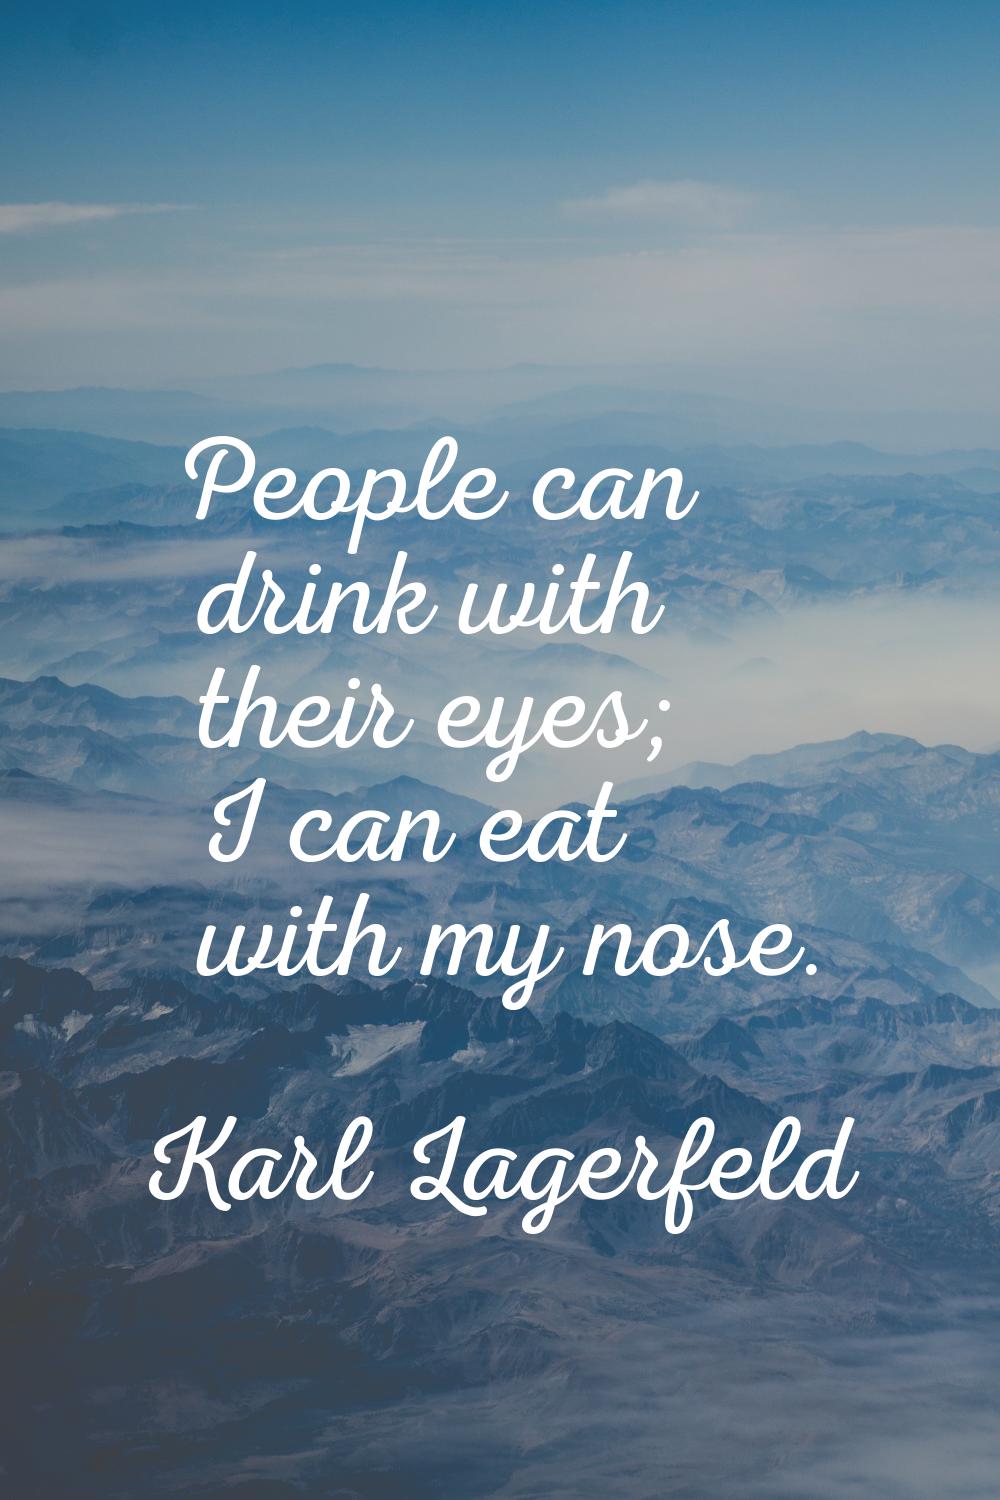 People can drink with their eyes; I can eat with my nose.